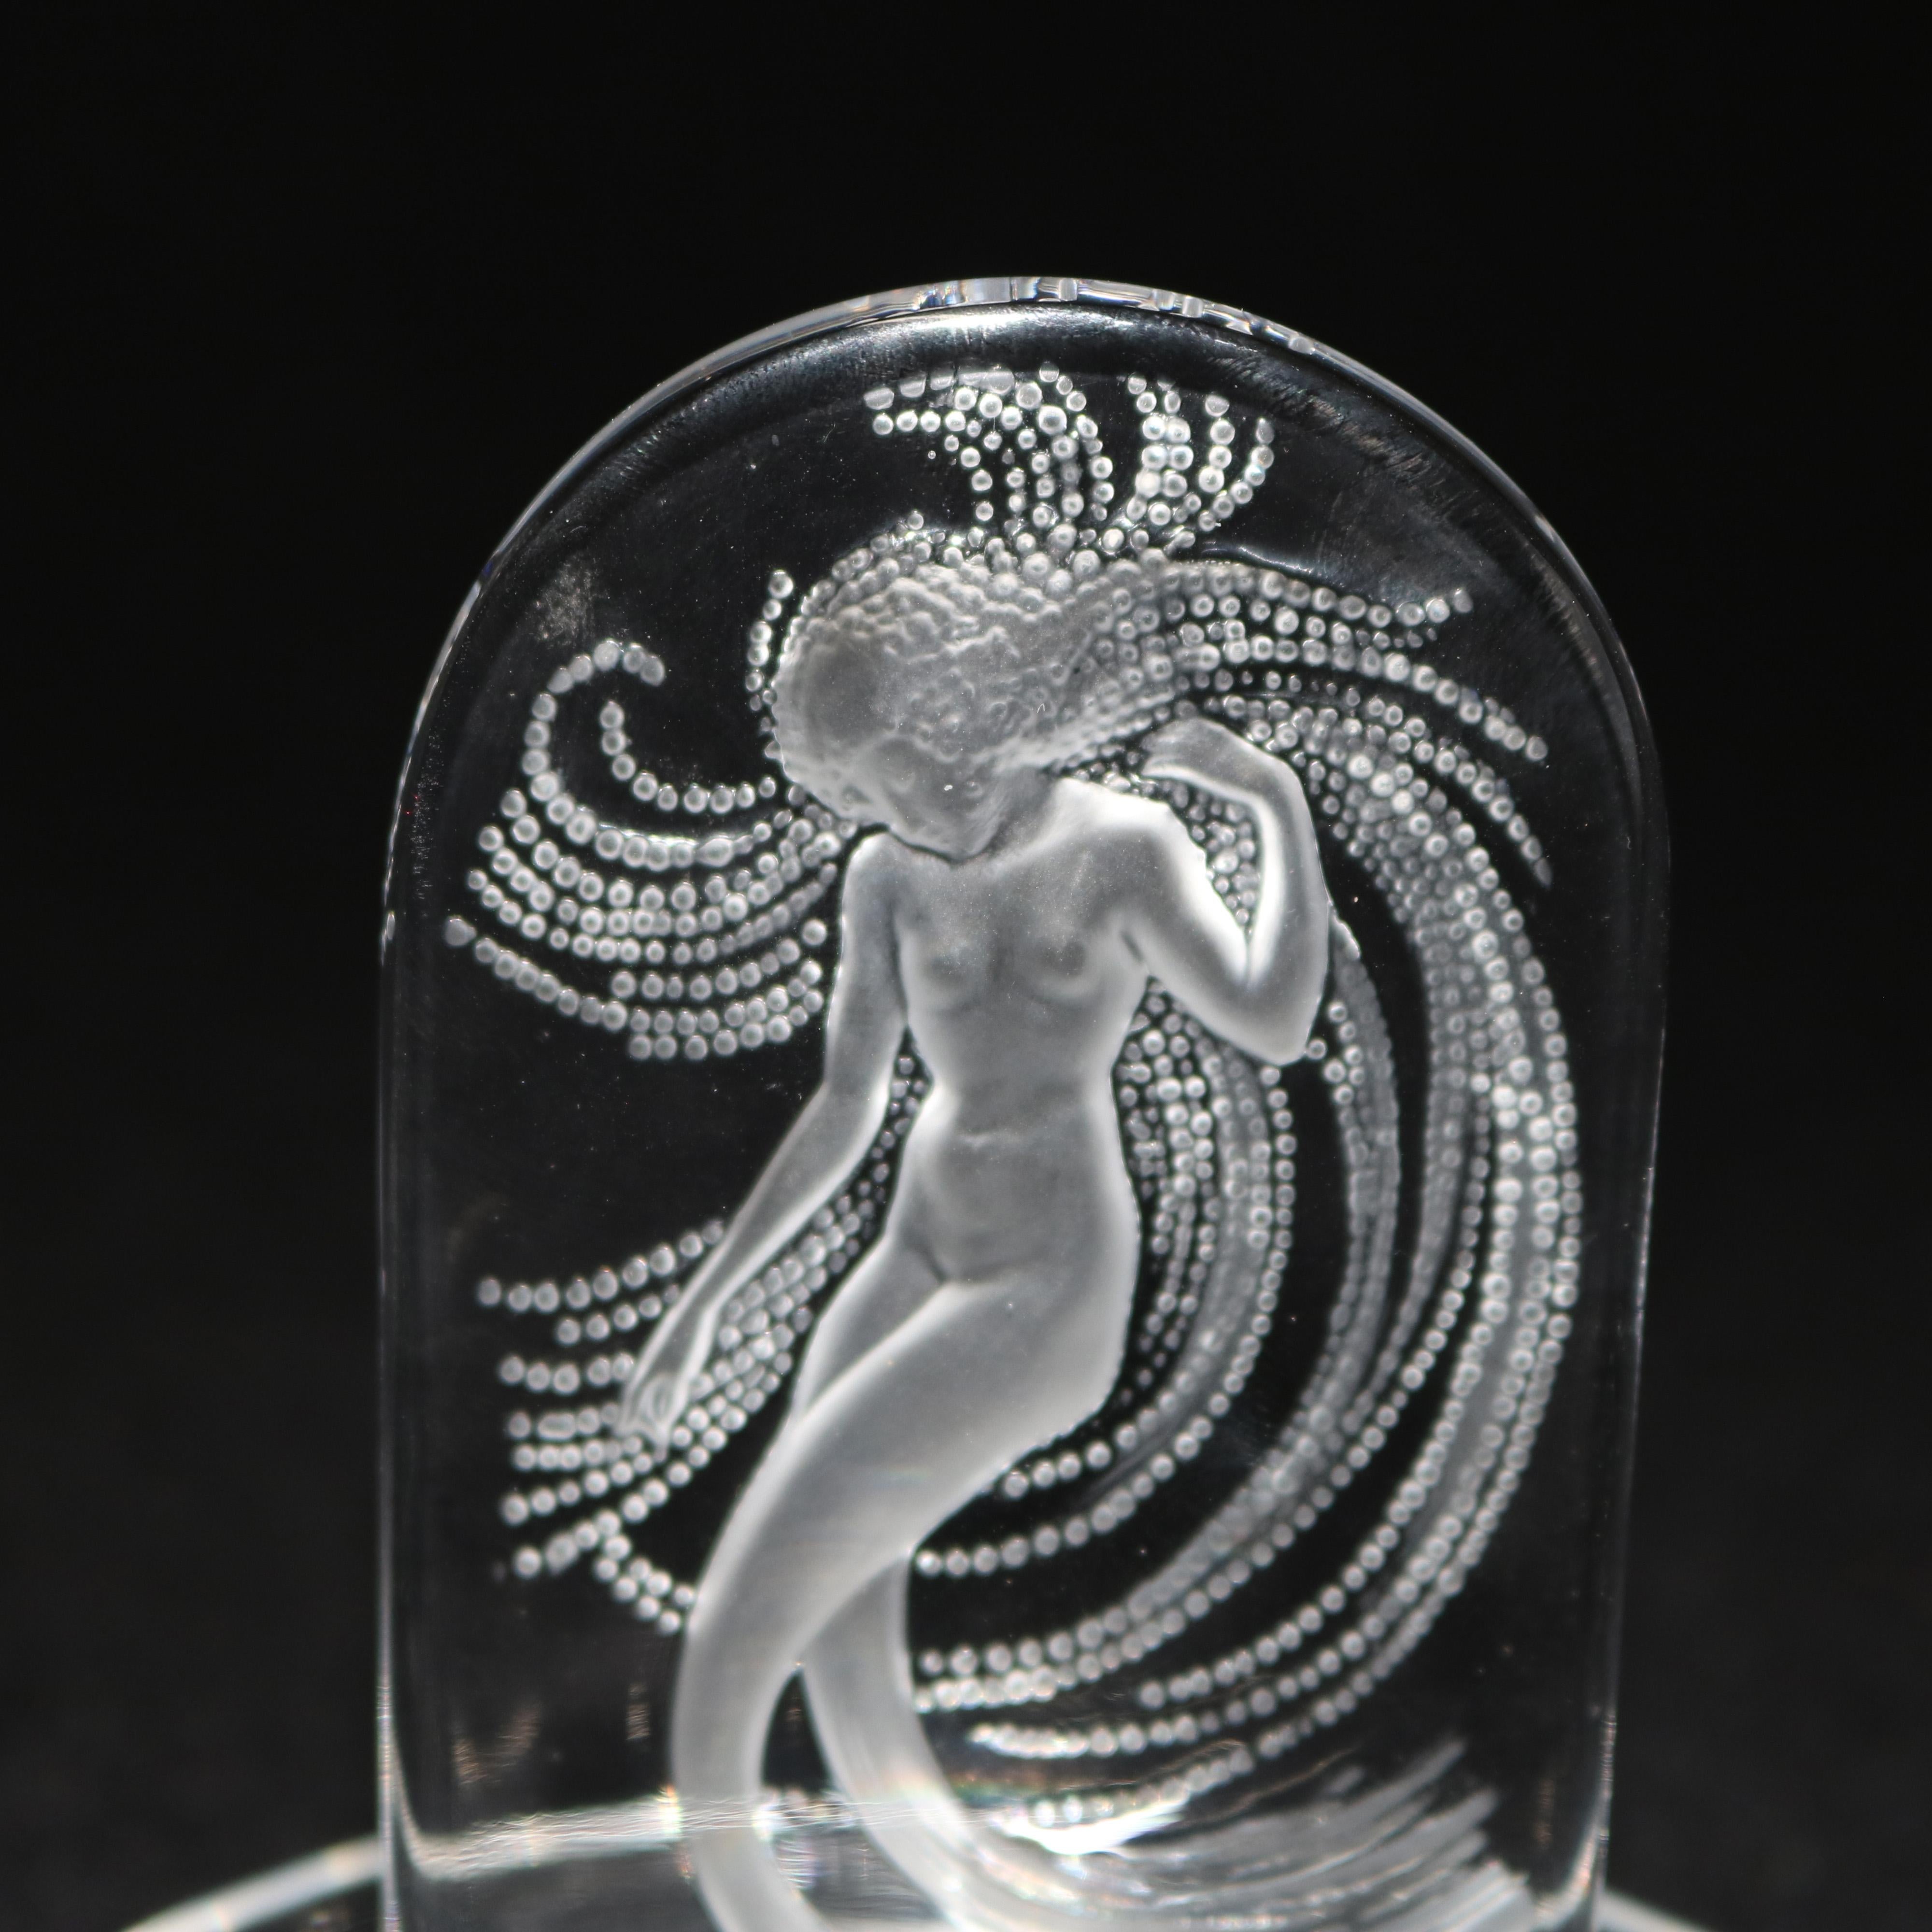 An Art Nouveau French art glass dresser pin tray by Lalique offers upper plaque depicting woman surmounting lower pin or jewelry tray, signed Lalique, France, 20th century

Measures: 4.13